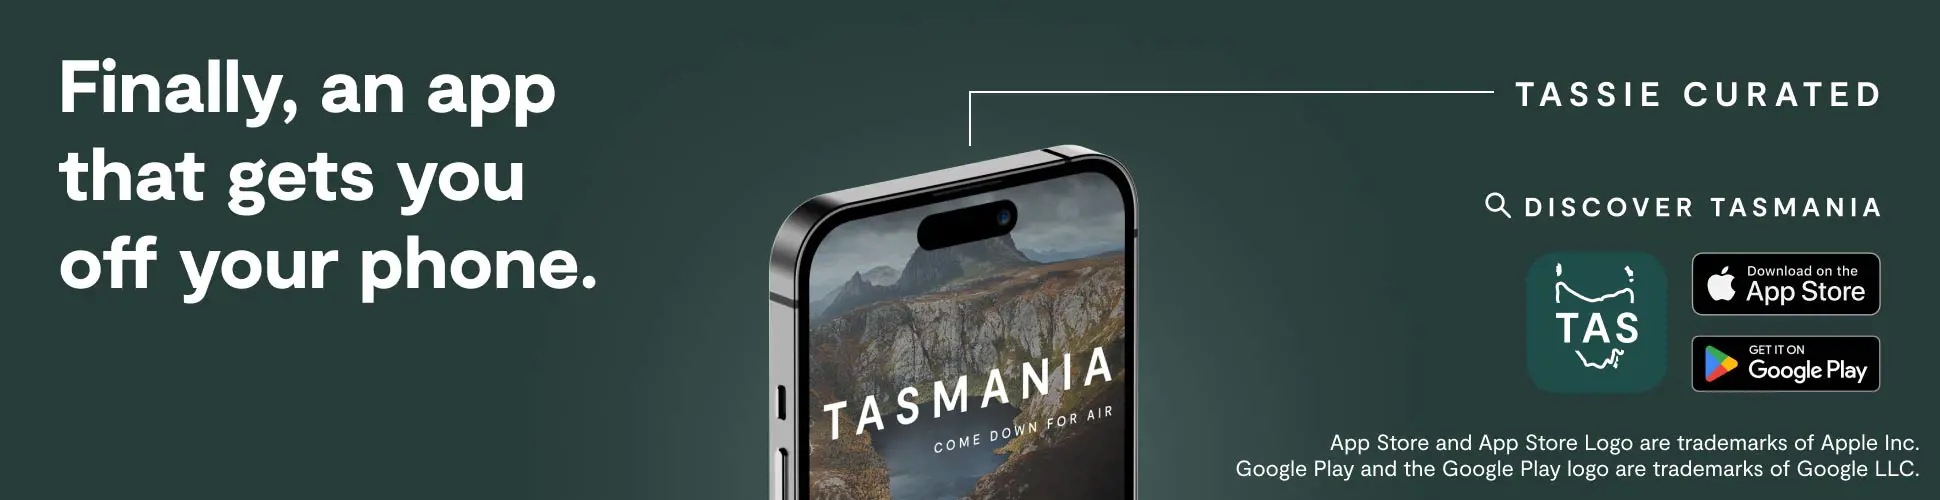 Download the Discover Tasmania App. Make travelling to Tasmania easier and find places to visit.